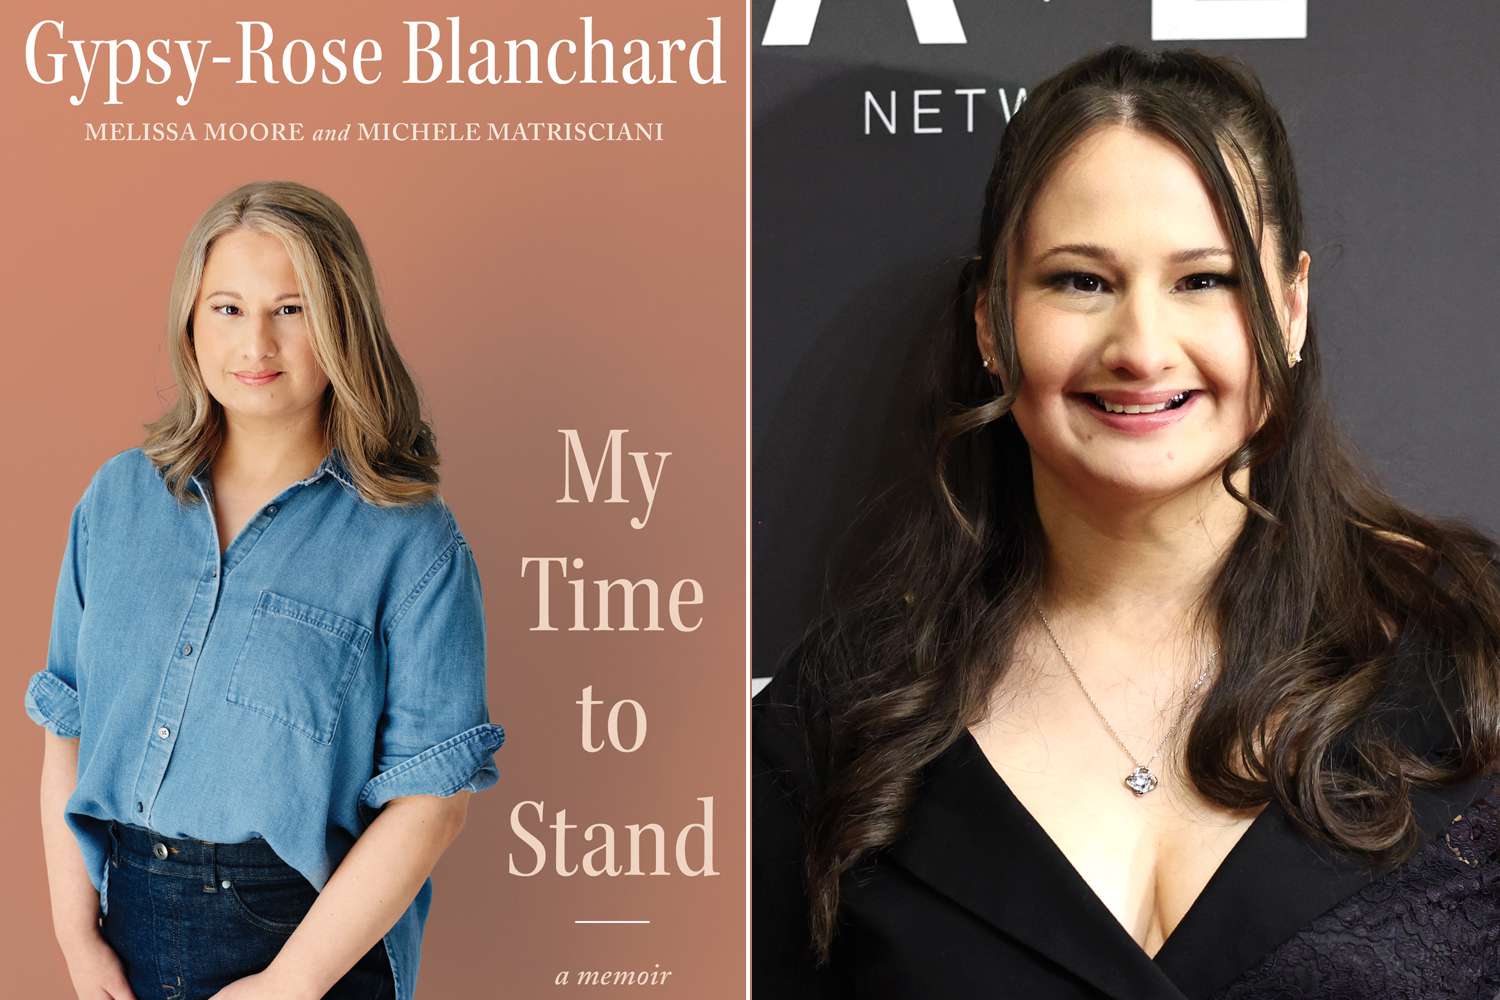 Gypsy-Rose Blanchard Memoir; Gypsy Rose Blanchard attends "The Prison Confessions Of Gypsy Rose Blanchard" Red Carpet Event 